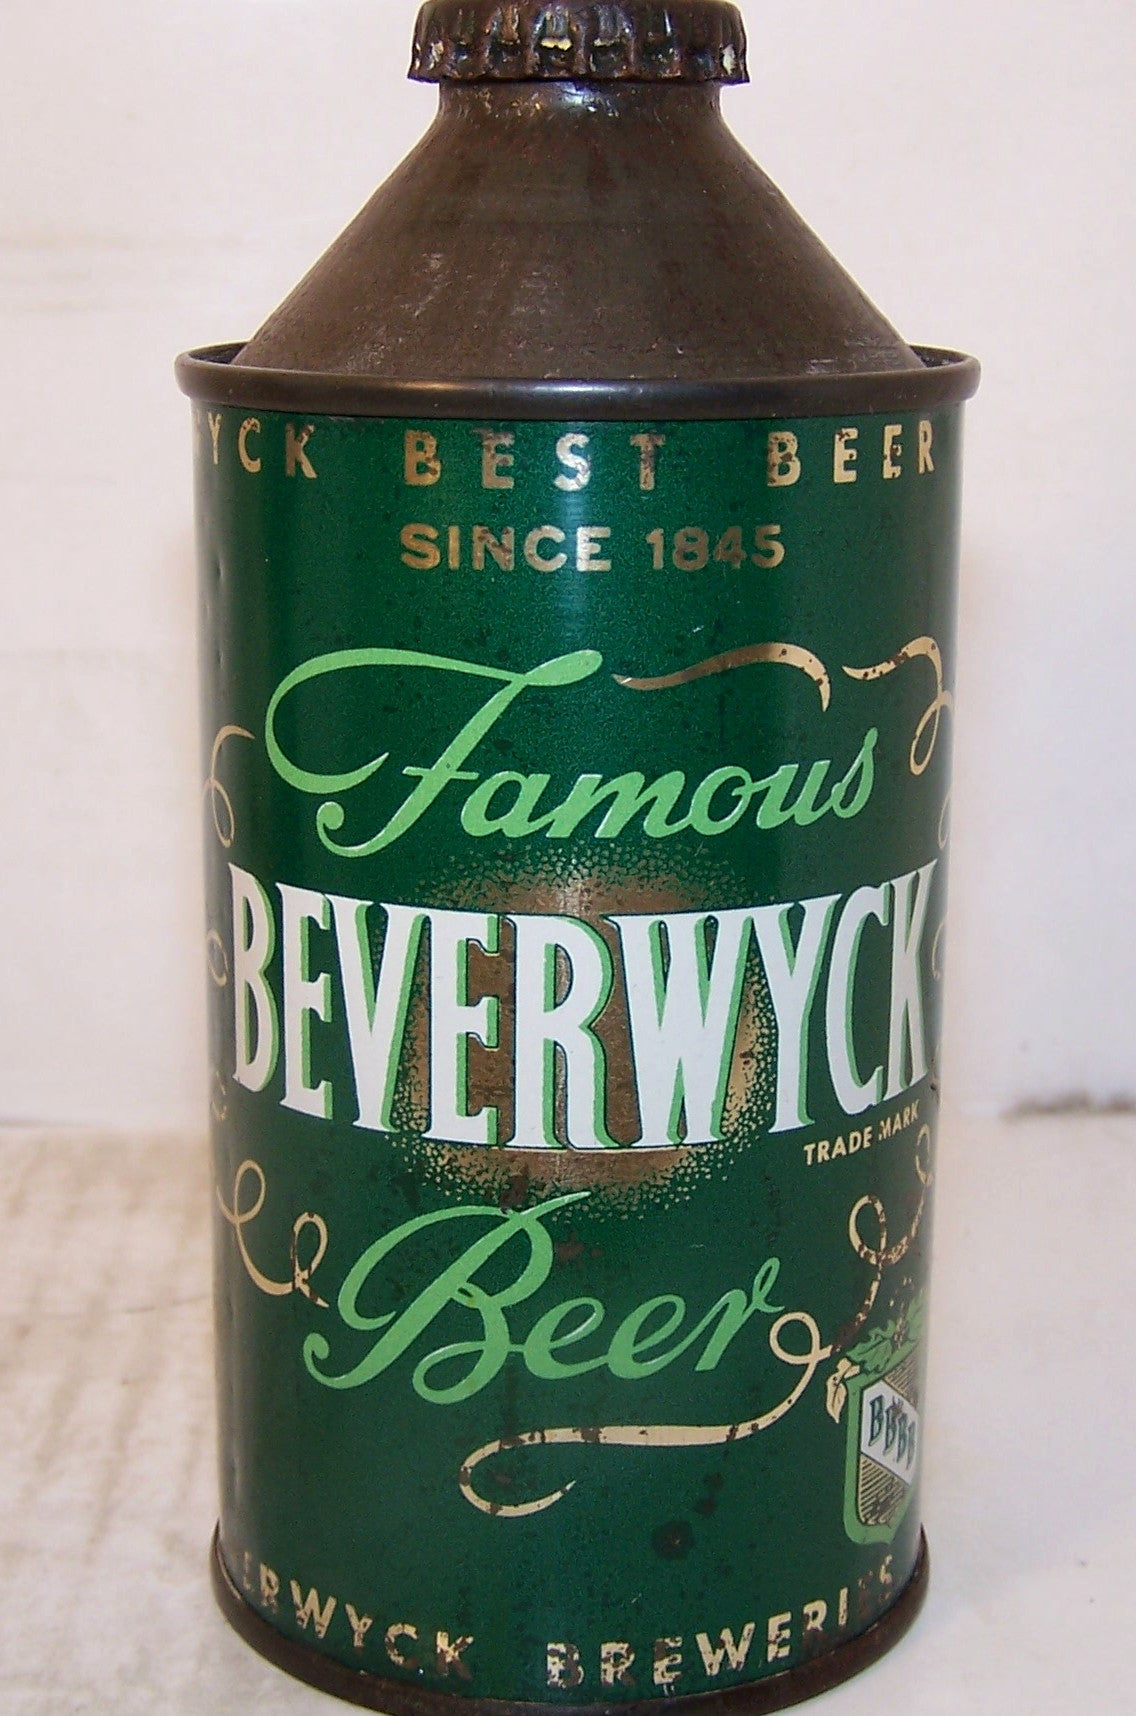 Beverwyck Famous Beer, USBC 152-14, Grade 1/1- Sold on 05/21/16